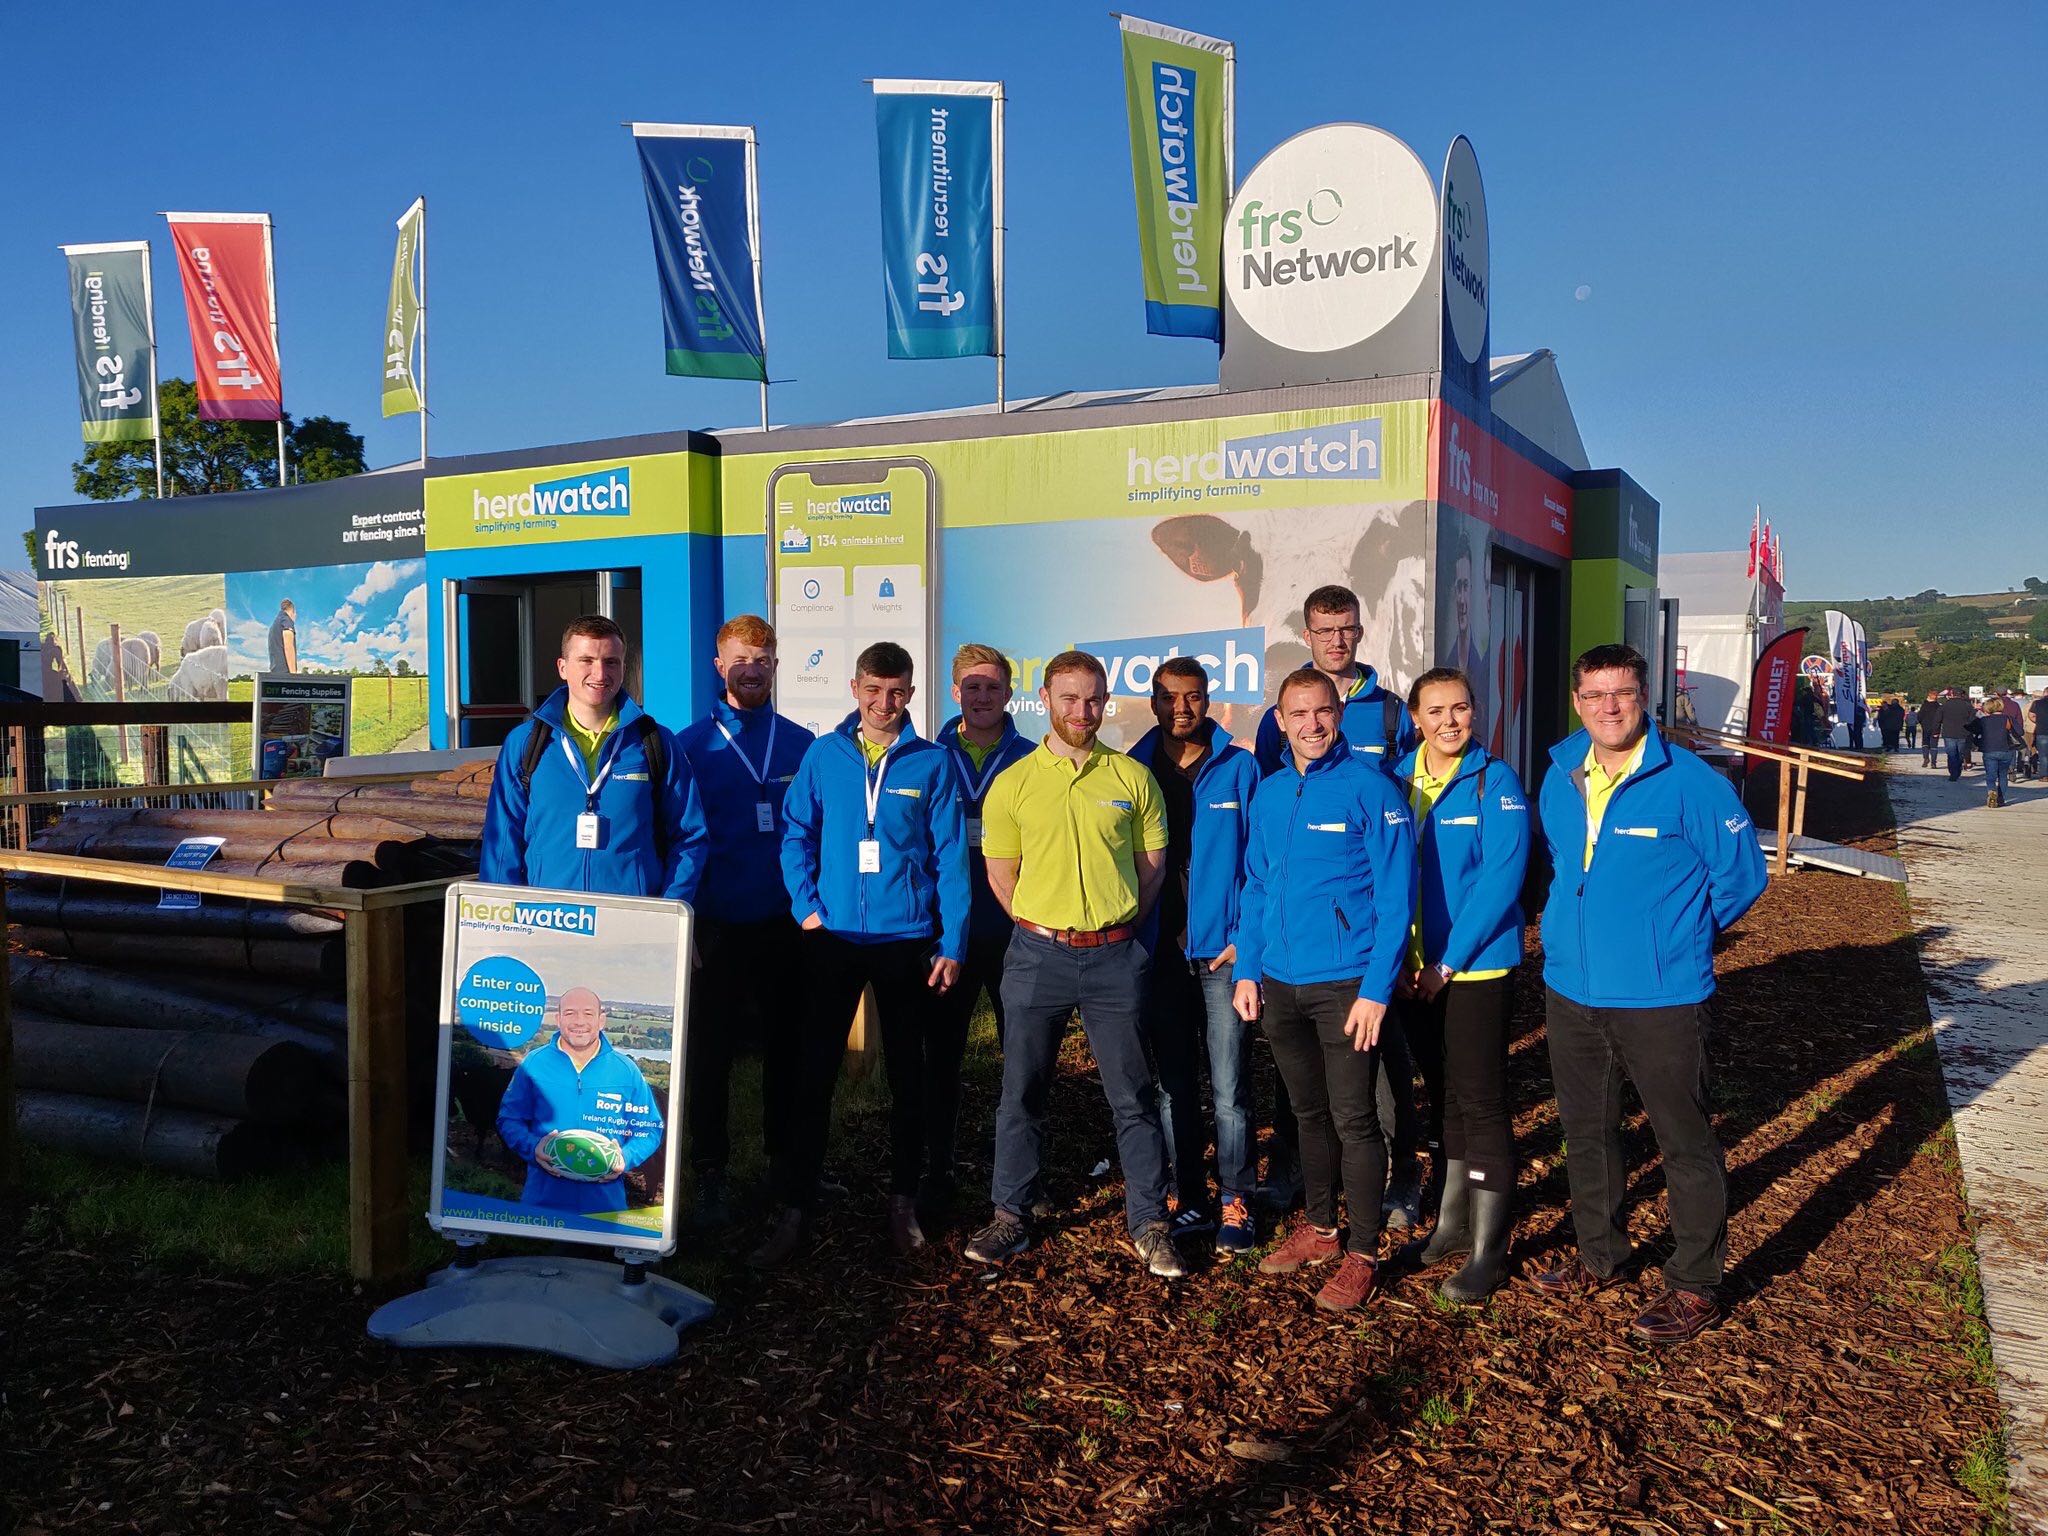 The Herdwatch team out in force at the National ploughing Championships 2019